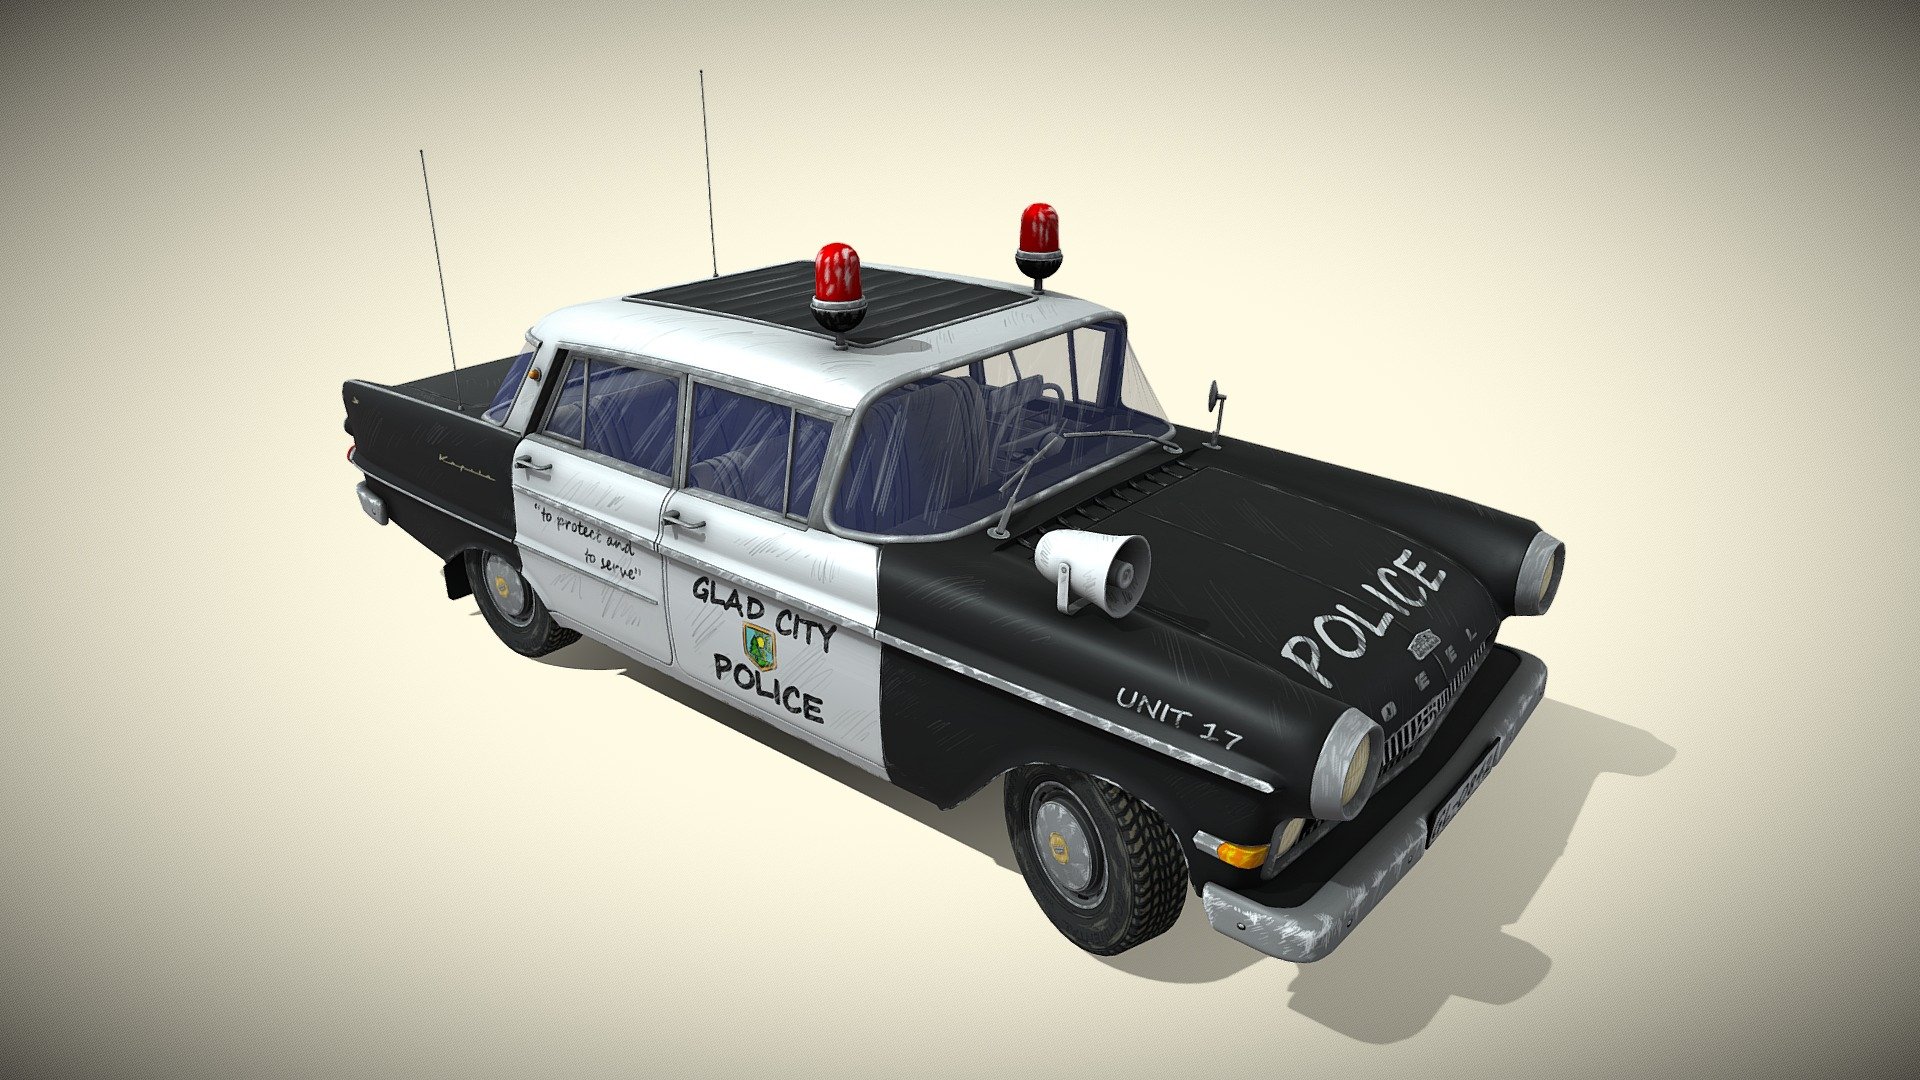 Stylized model of a police car from the classic era. Model comes with normal maps and diffuse. I din`t use metalness or roughness maps, just values. Interior, engine, trunk and underside is modelled also.  3x4096 main diffuse textures and 6 smaller textures for diffent details. I changed name from Opel to Oeel and other small logos for copyright reasons. I included psd textures and max file to download 3d model